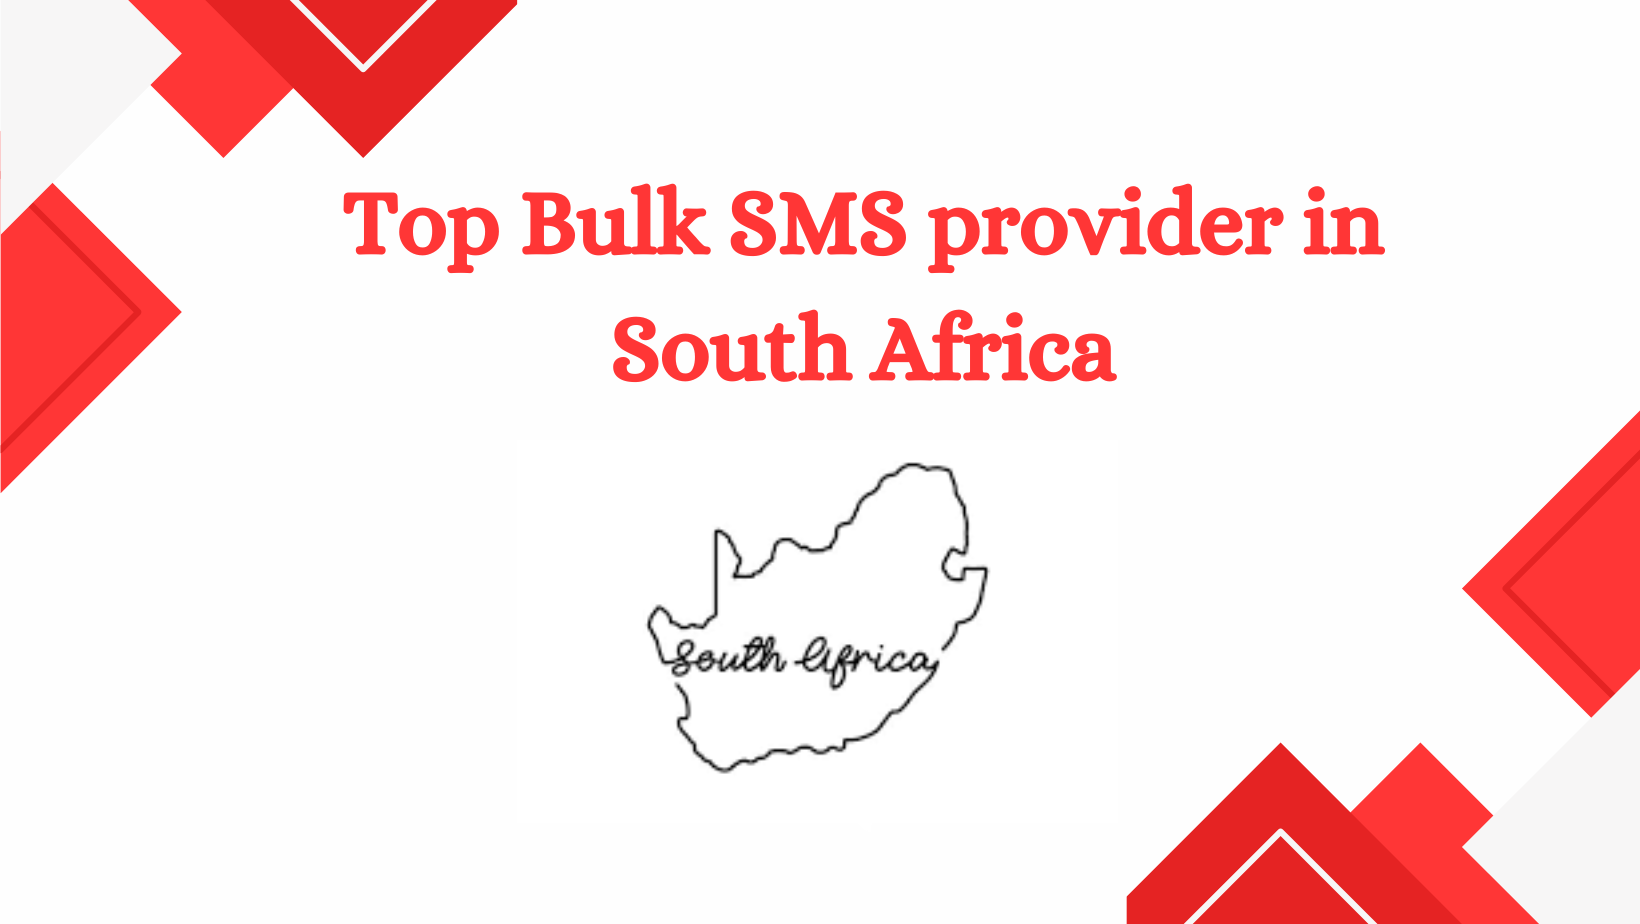 Top Bulk SMS provider in South Africa